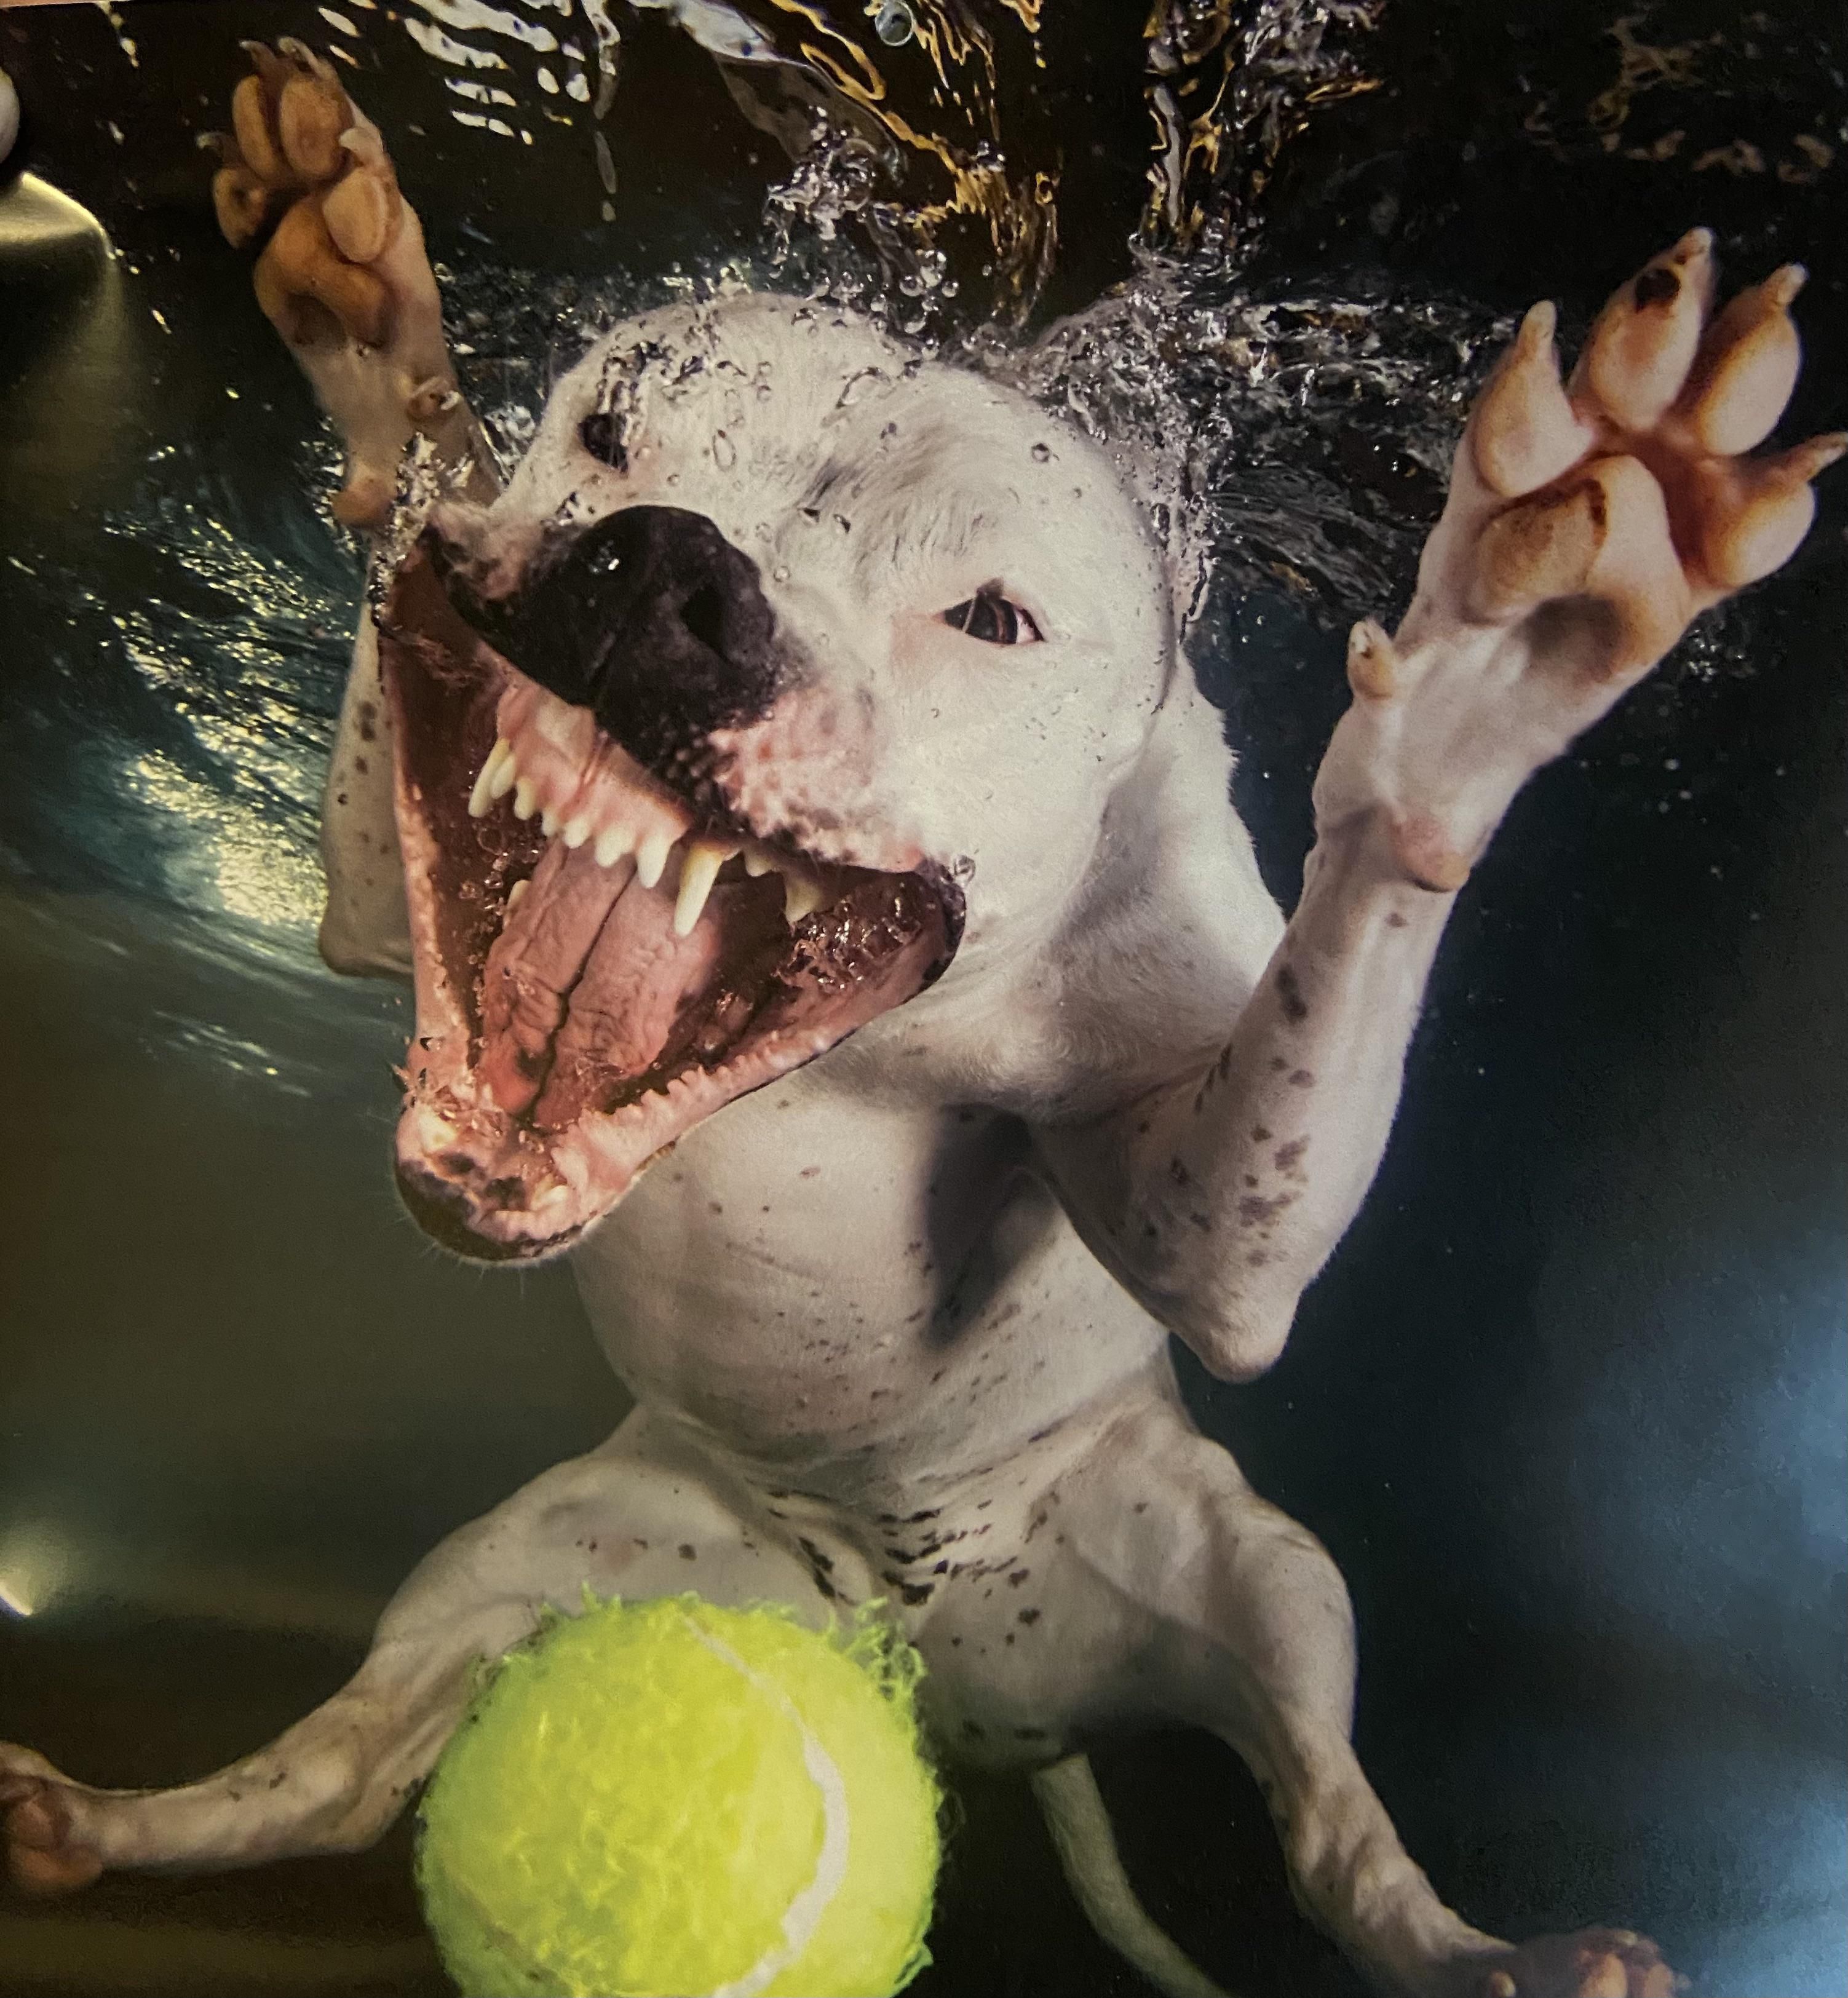 Someone bought us an ‘Underwater Dogs’ calendar. I’m not sure if it’s cute or terrifying...